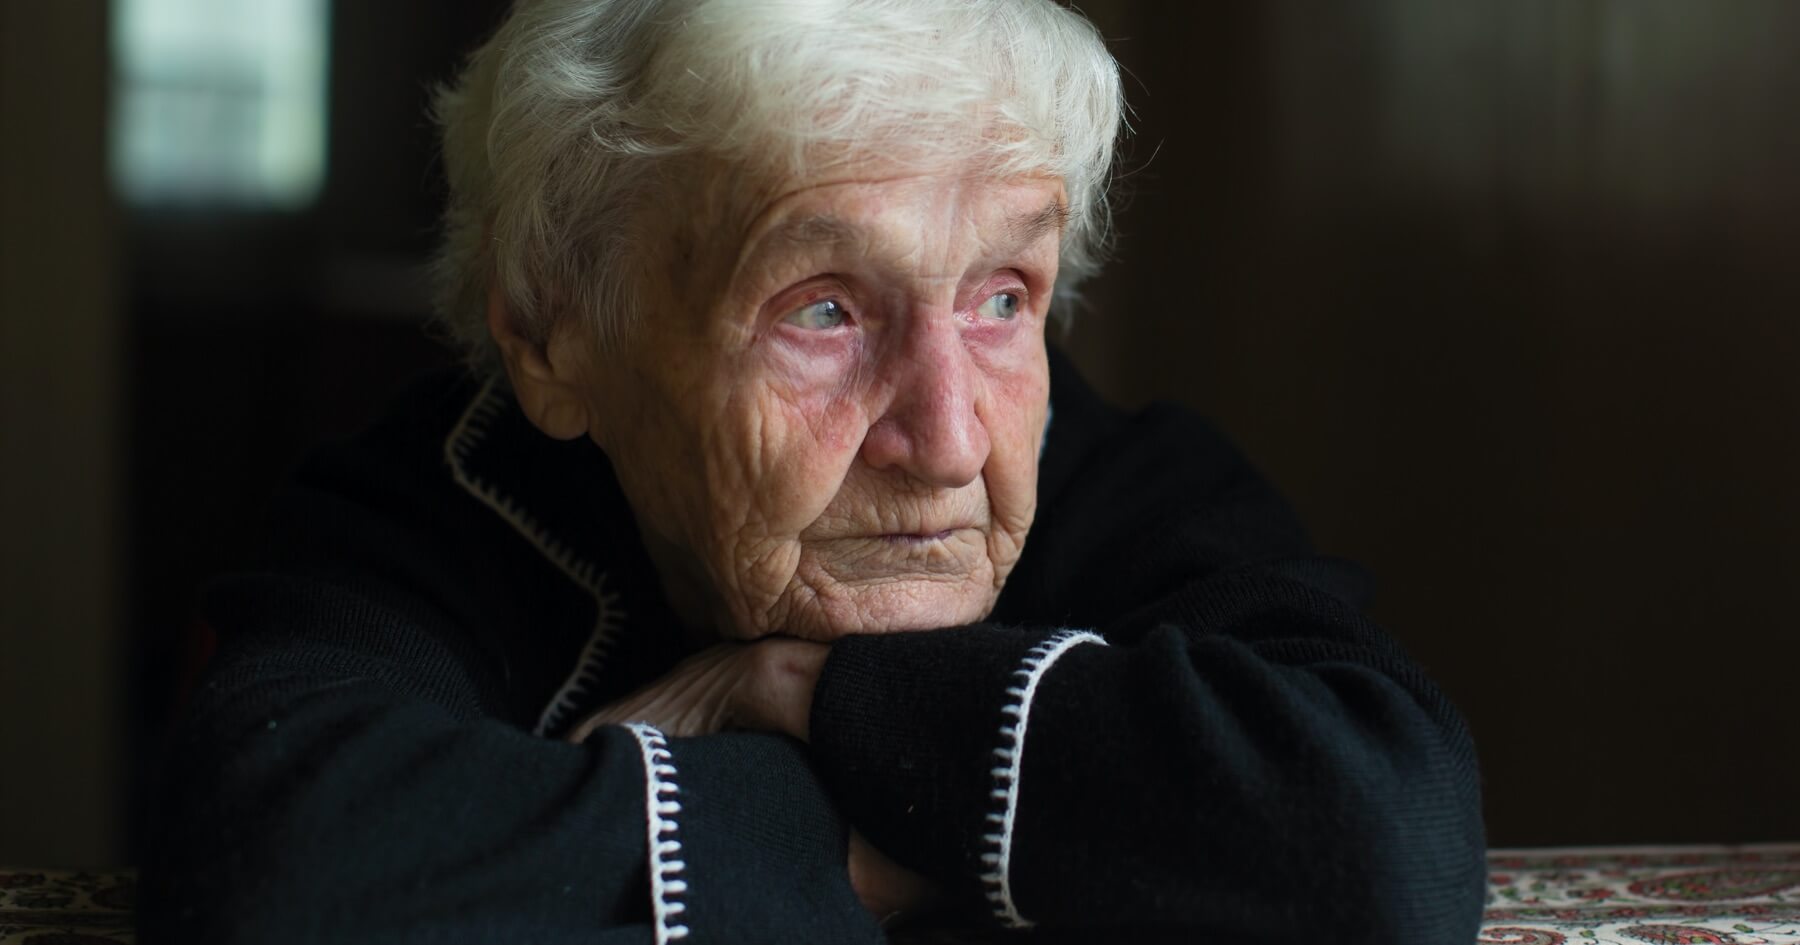 Elderly woman opts for euthanasia to avoid another lockdown